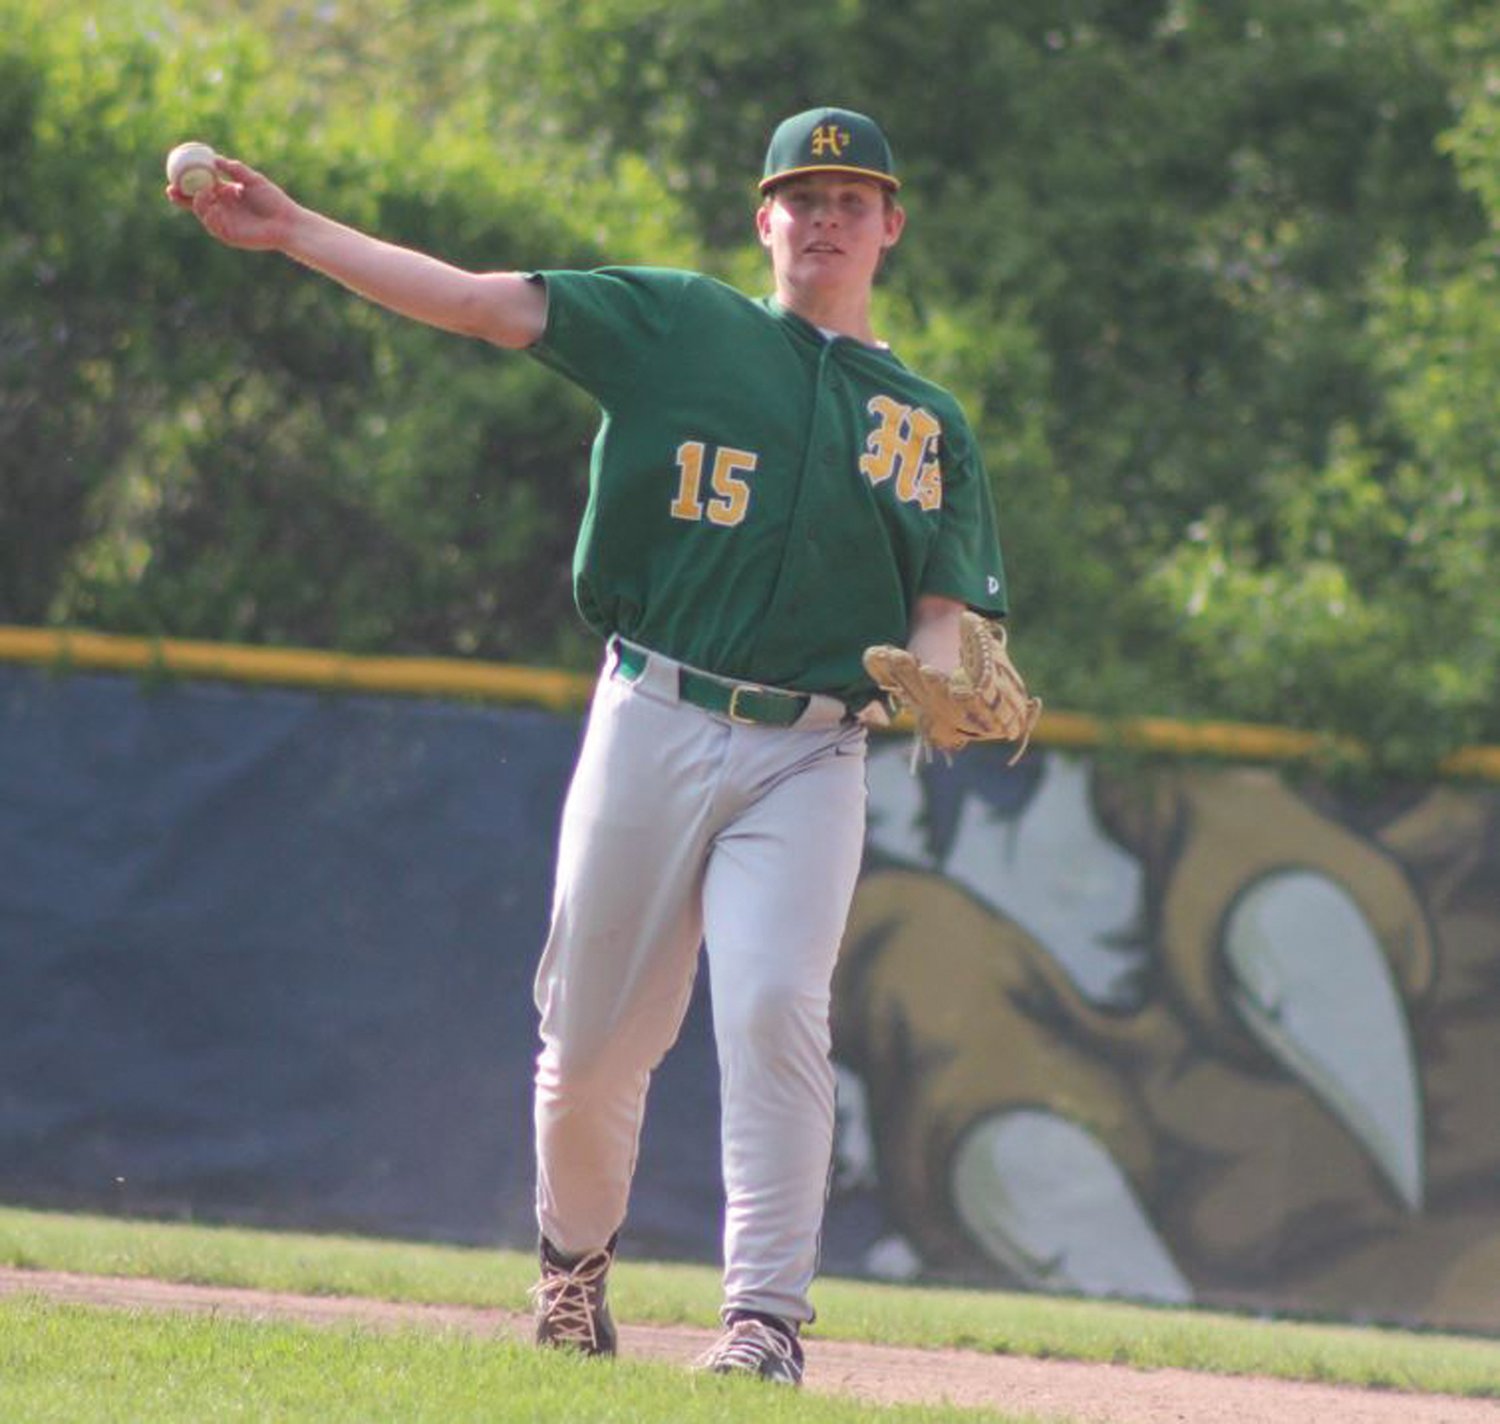 THE THROW TO FIRST: Hendricken’s Jeff Mercedes makes a play to first base.